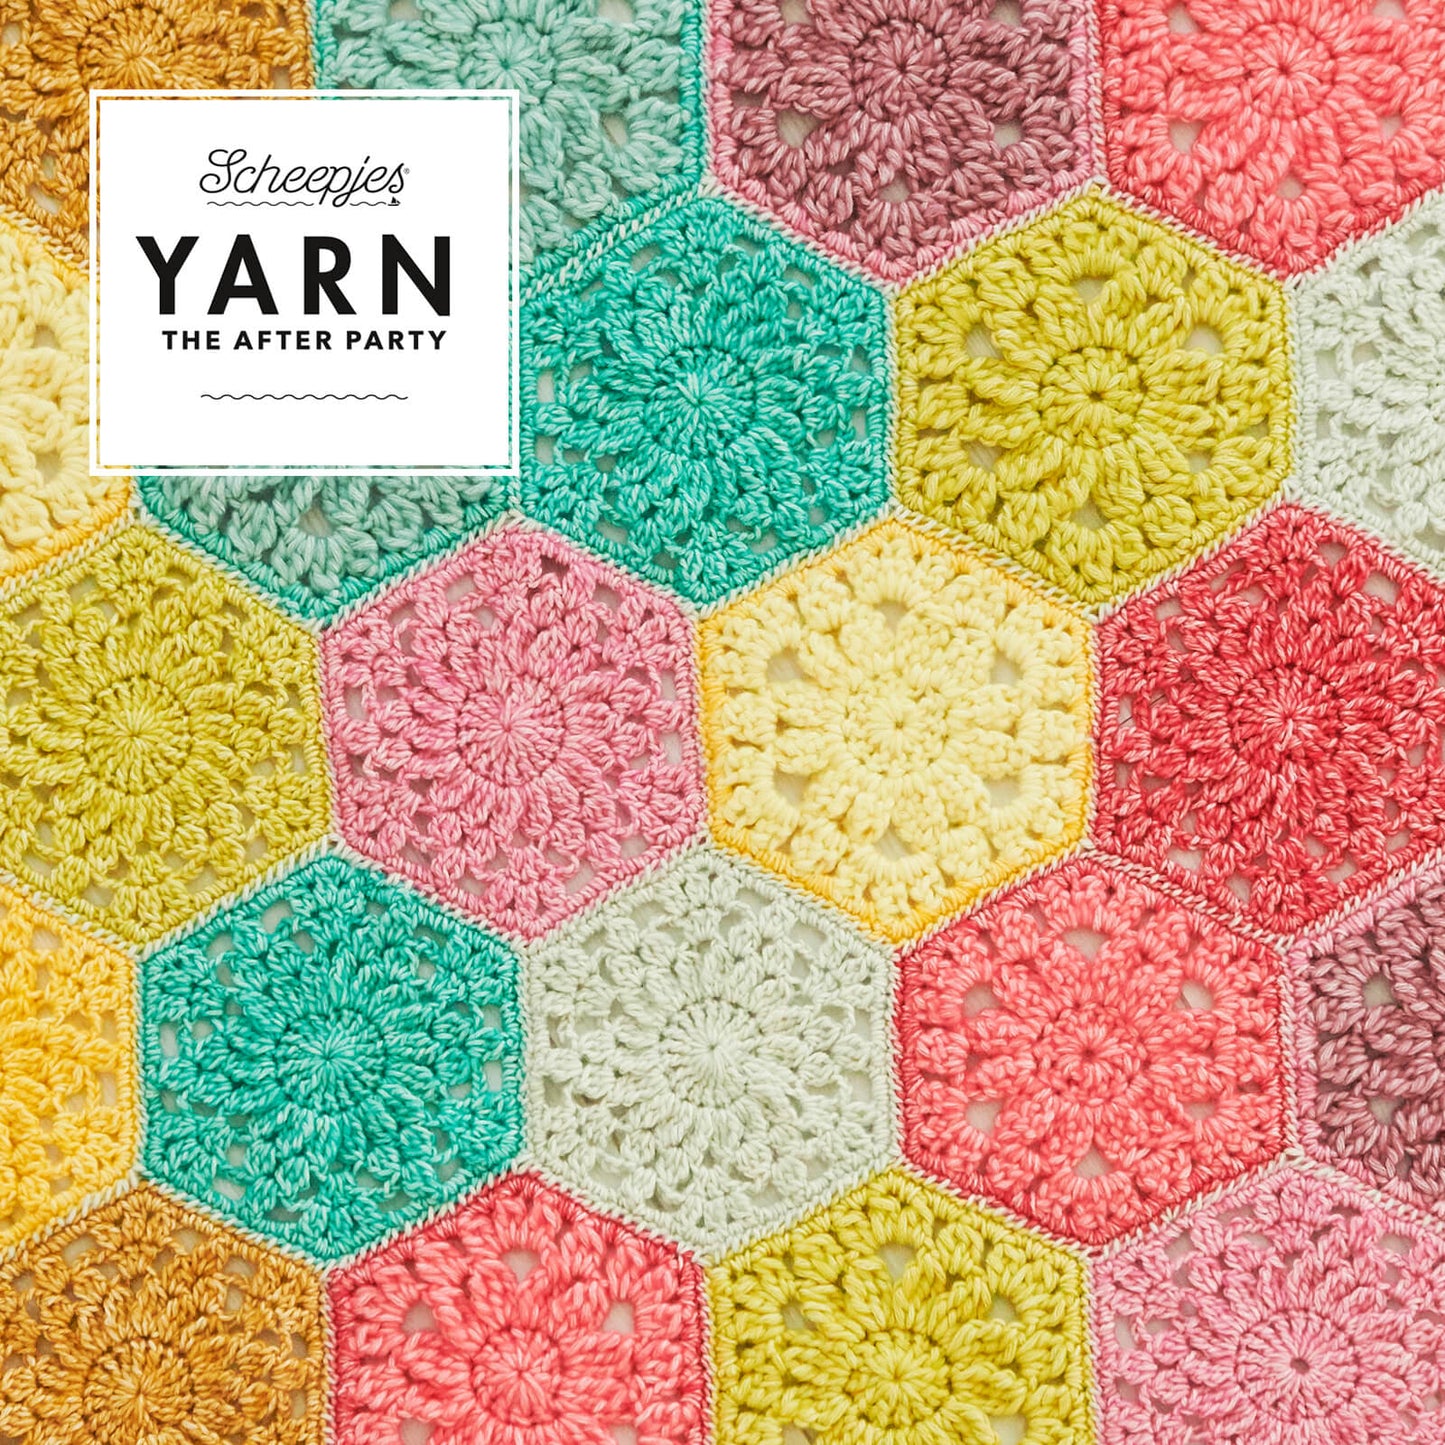 Scheepjes Yarn The After Party no. 42 - Confetti Blanket (booklet) - (Crochet)